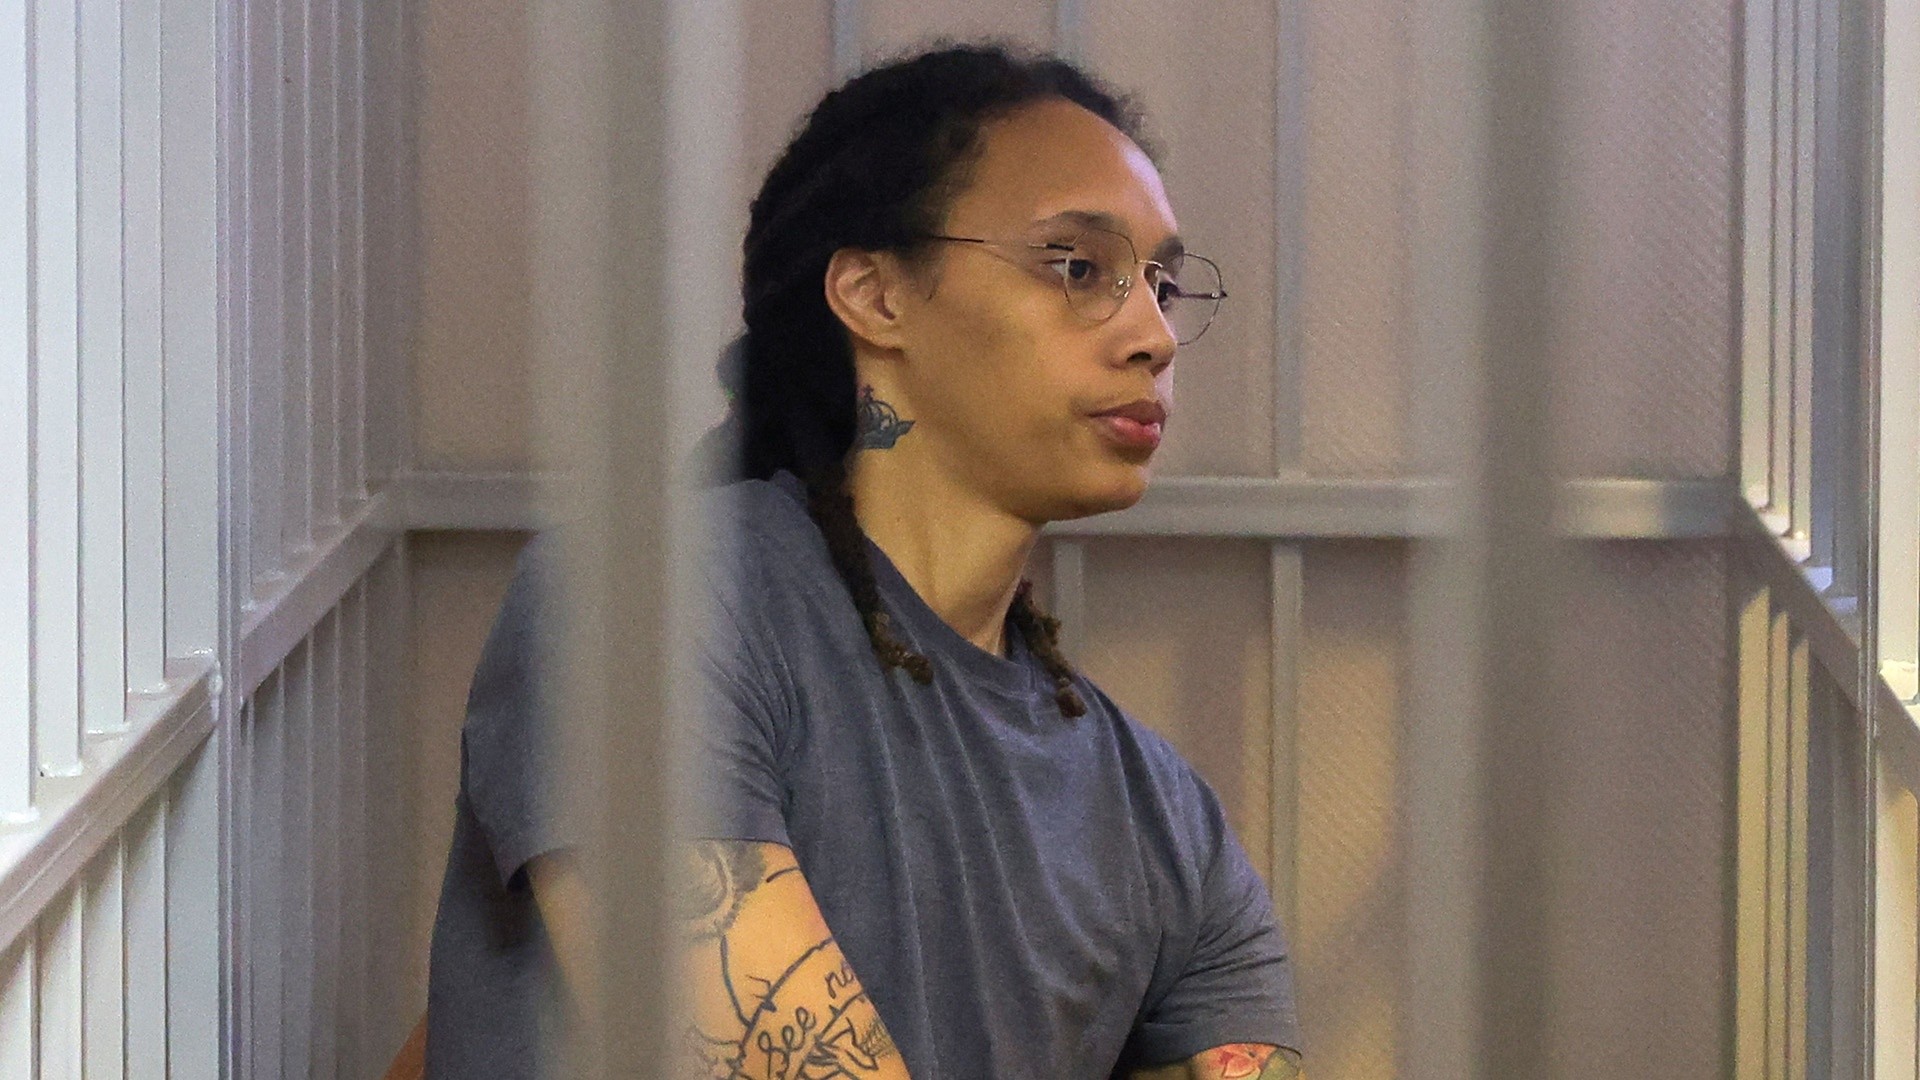 Brittney Griner meets with US officials inside Russian jail